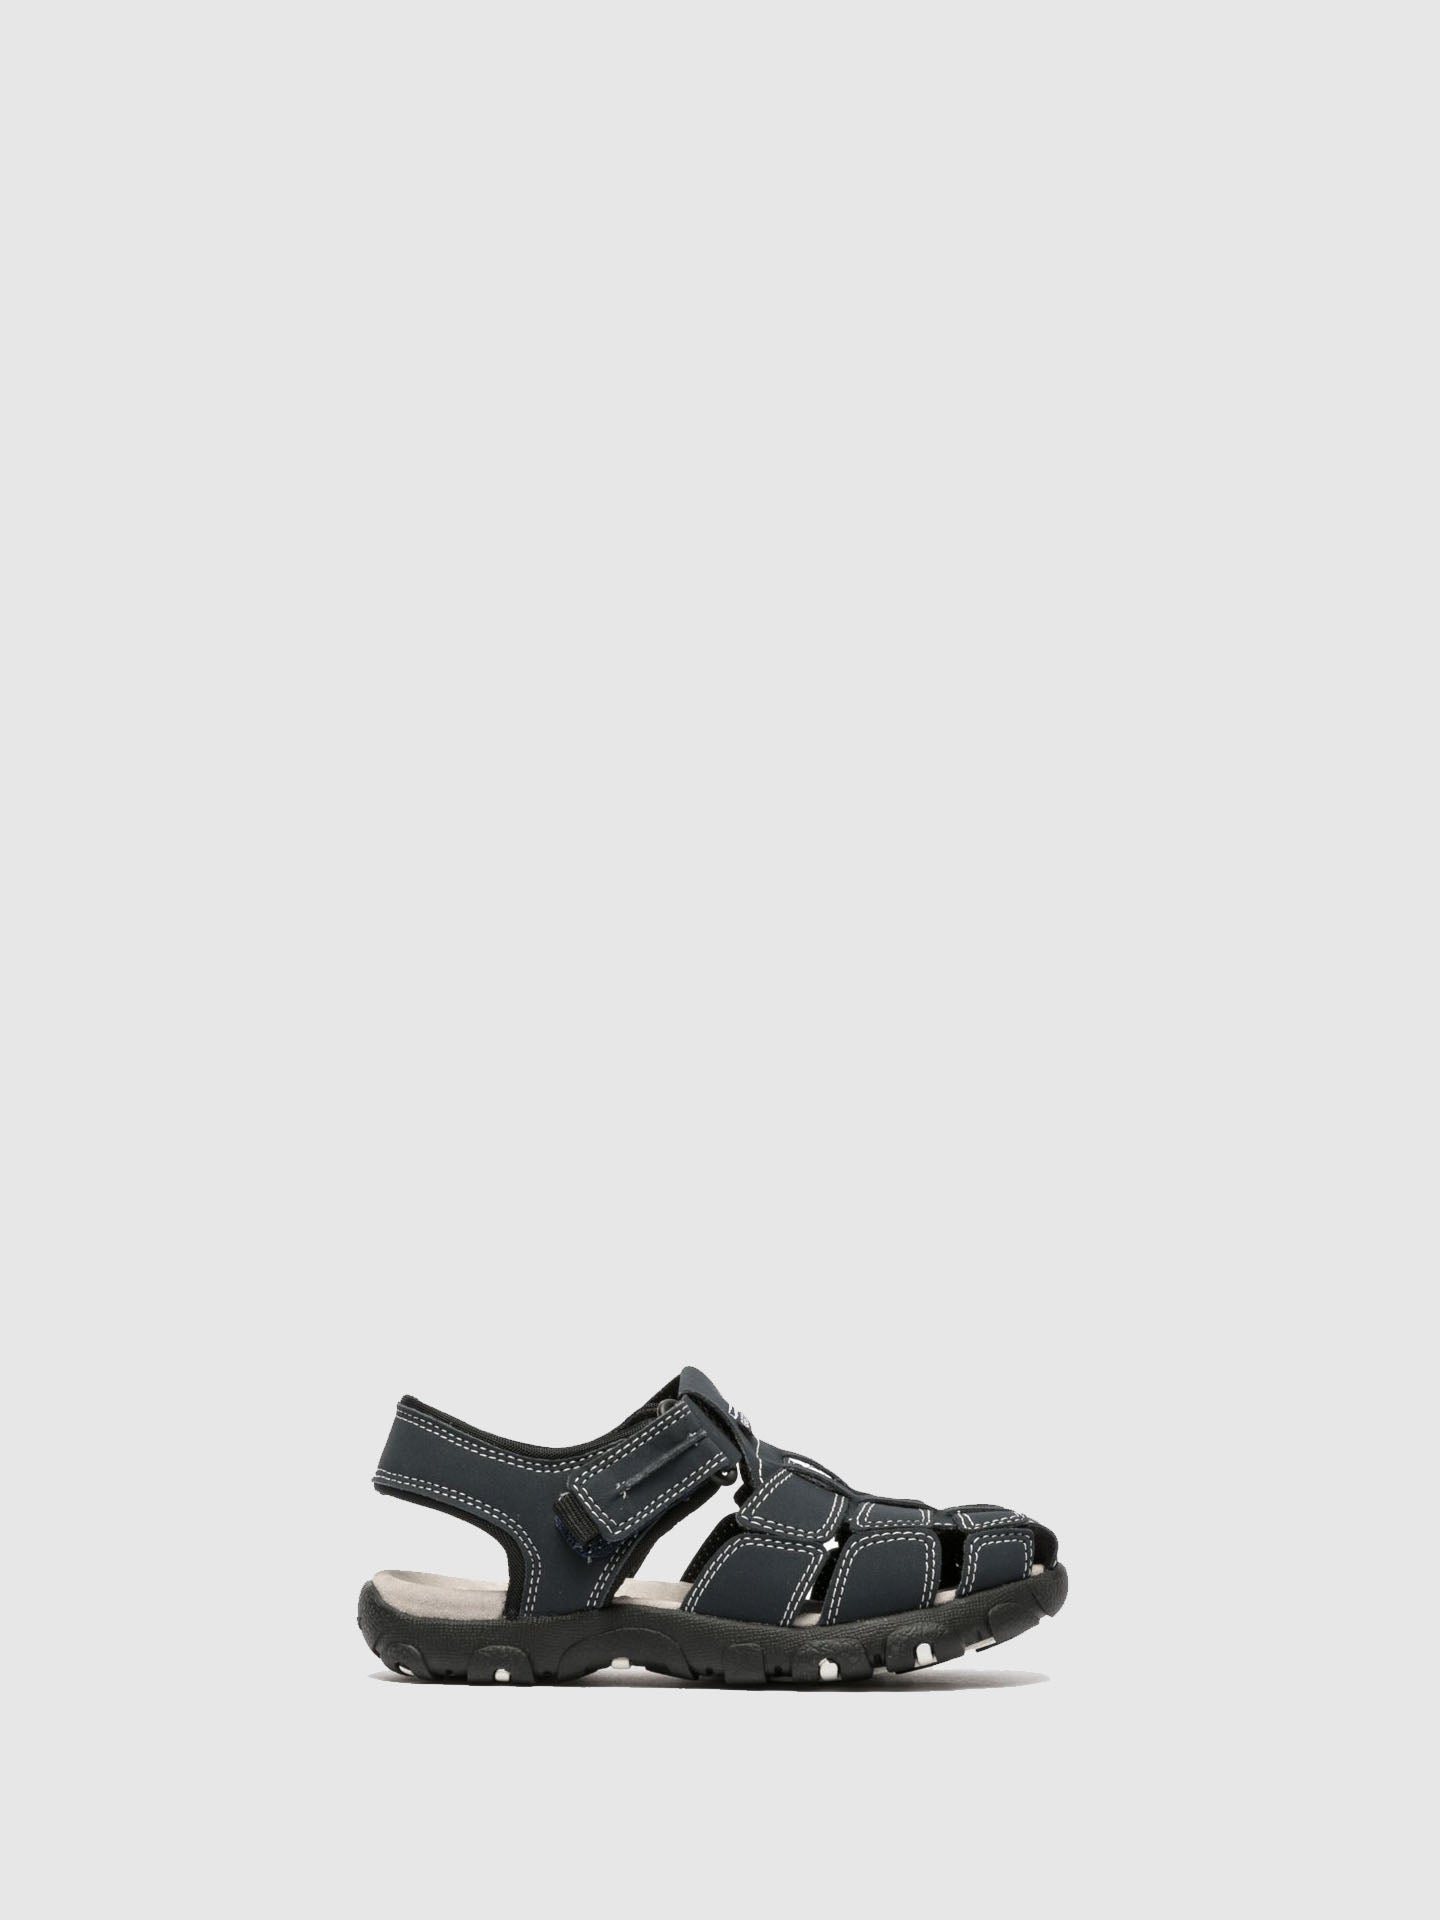 Geox Blue Buckle Sandals